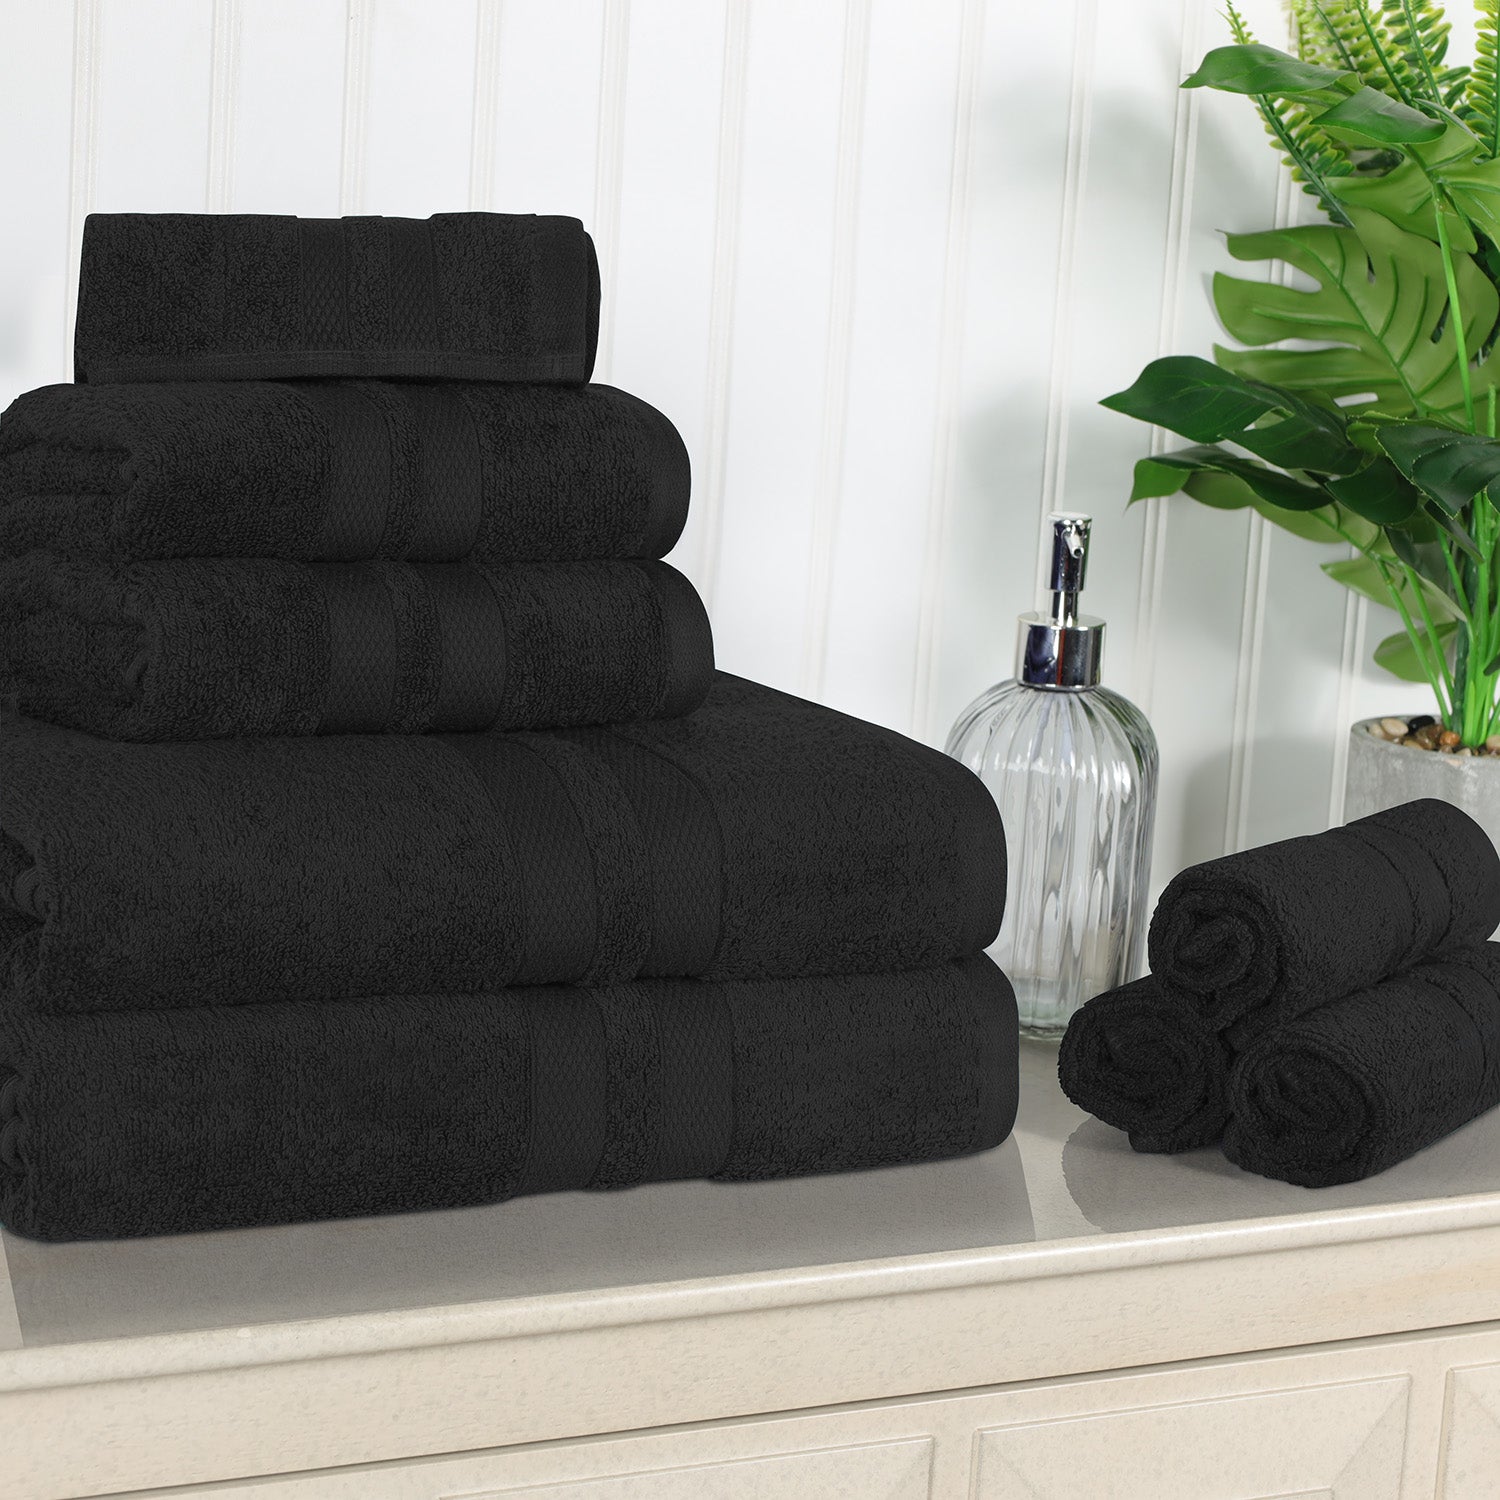 Superior Ultra Soft Cotton Absorbent Solid Assorted 8-Piece Towel Set -  Black